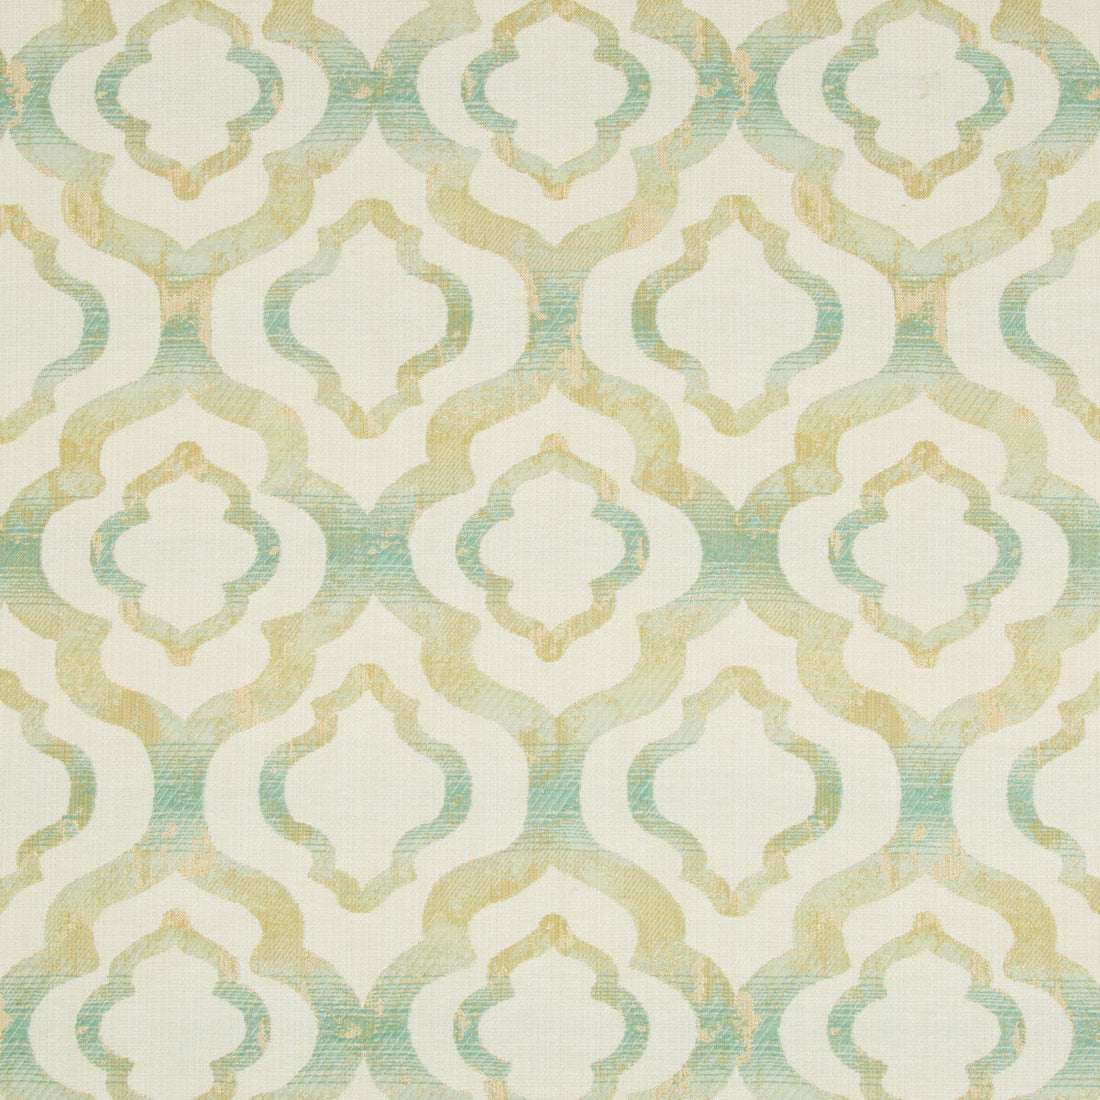 Kravet Design fabric in 34681-13 color - pattern 34681.13.0 - by Kravet Design in the Crypton Home collection